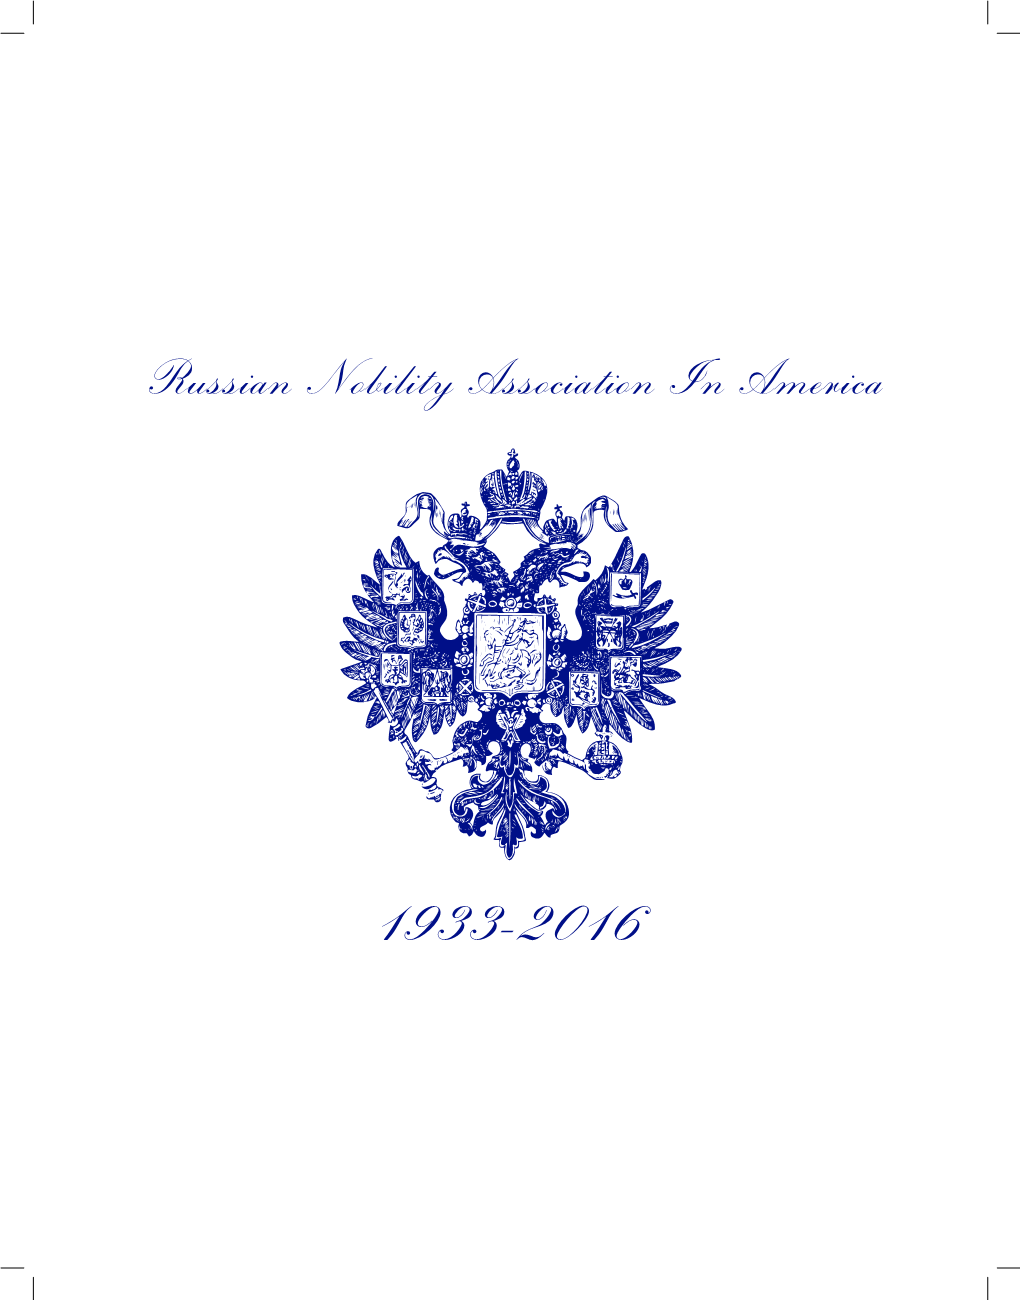 Russian Nobility Association in America